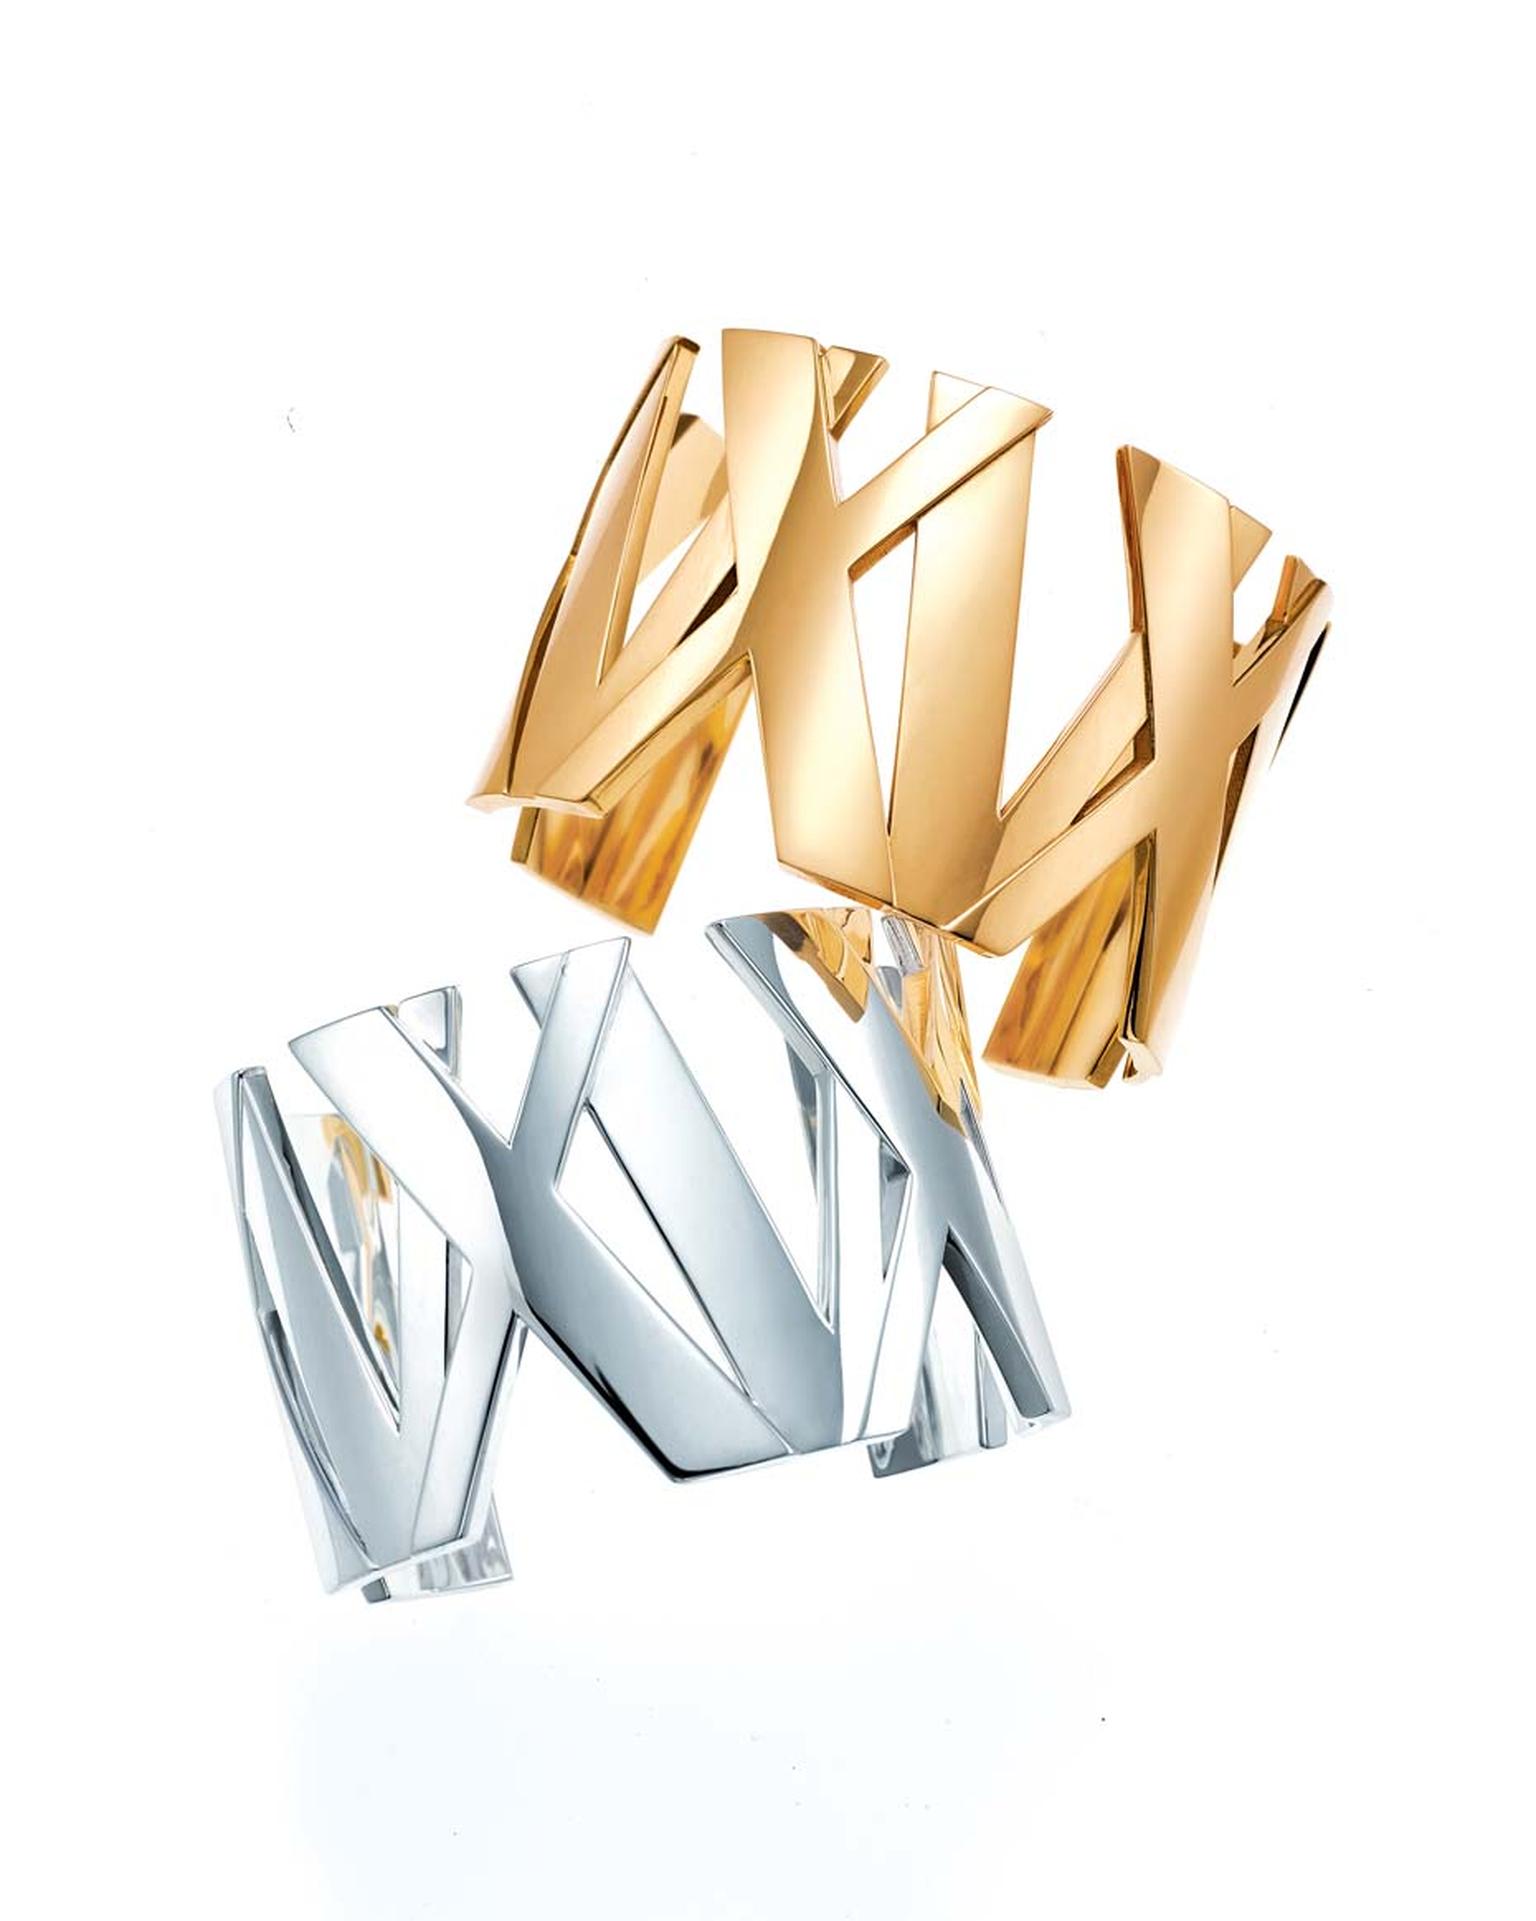 Tiffany & Co. Atlas II collection wide cuffs are available in yellow, rose or white gold as well as sterling silver and titanium